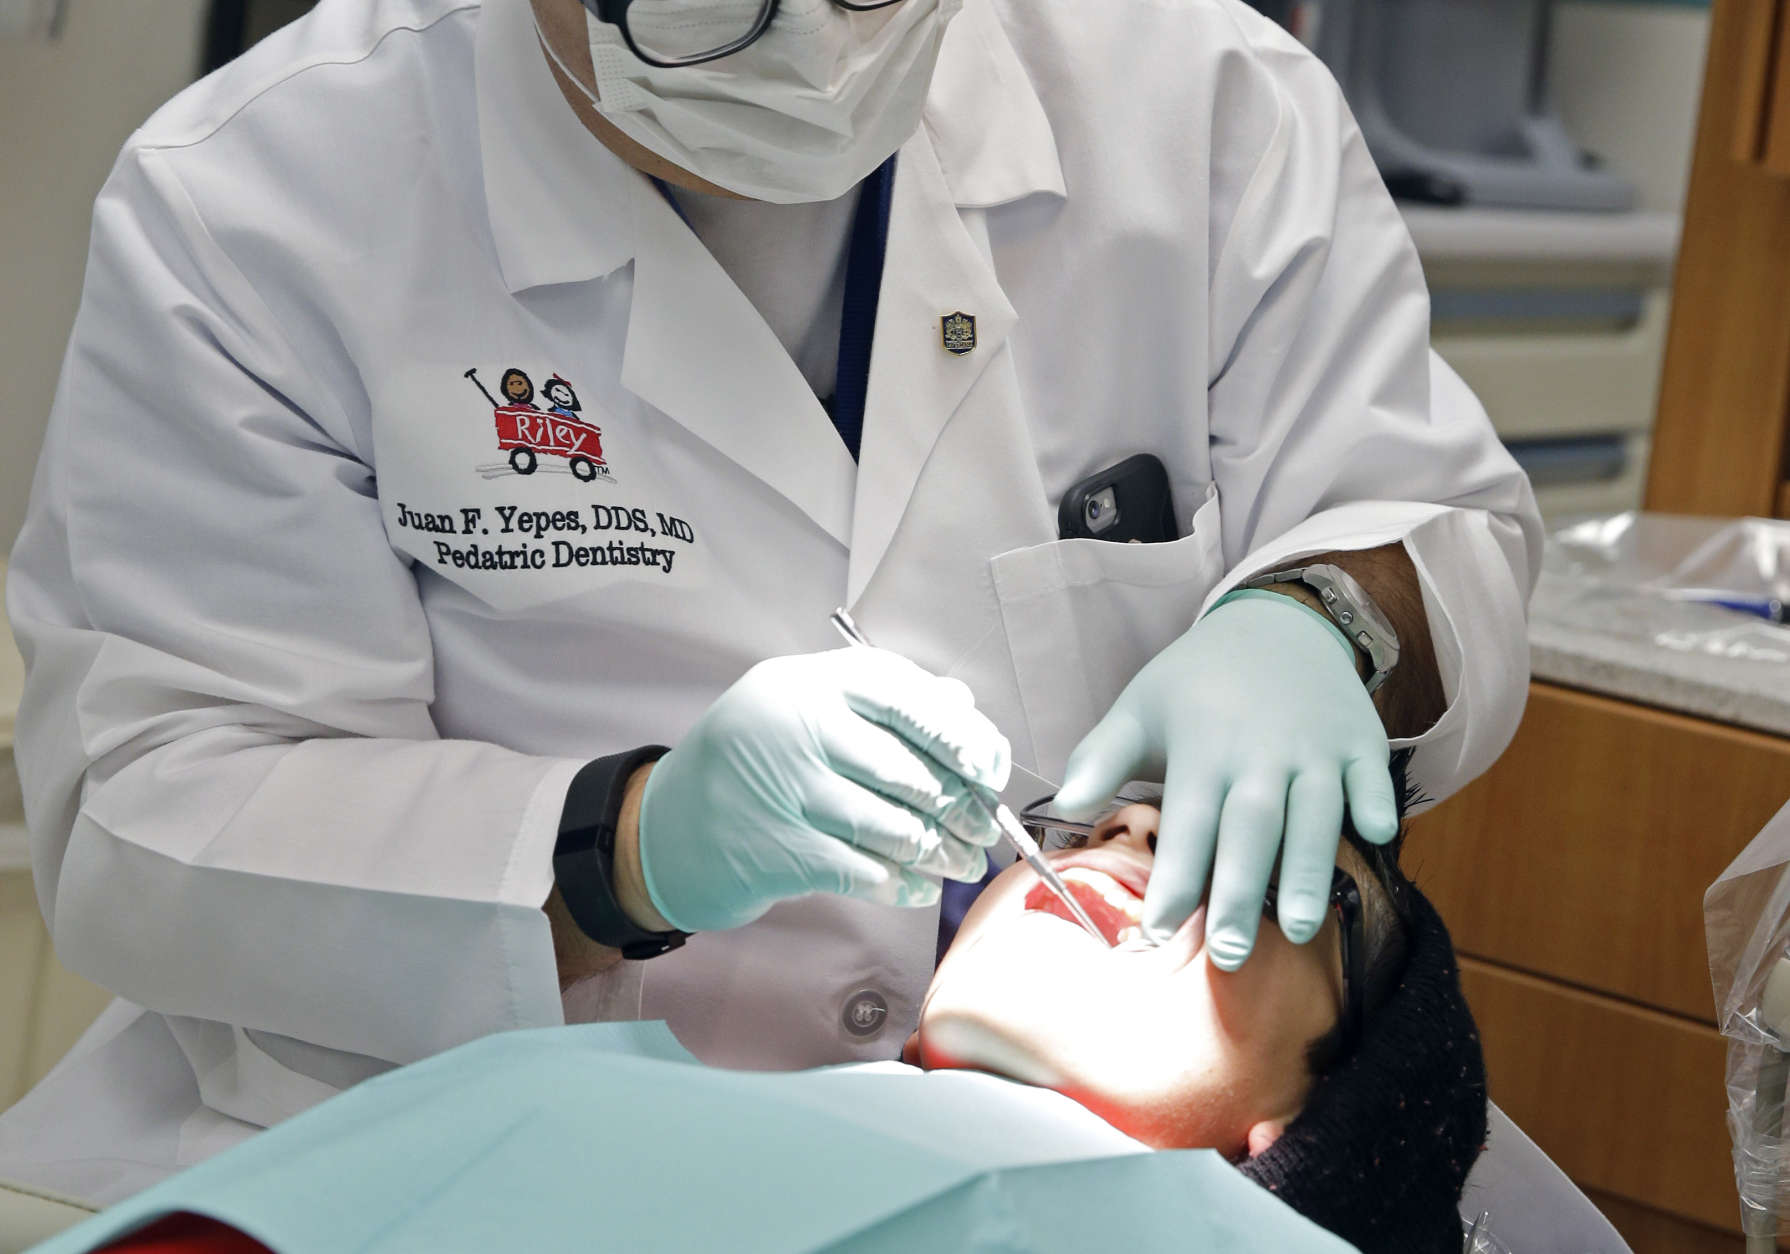 In this Friday, Jan. 22, 2016 photo, Dr. Juan Fernando Yepes, a dentist at the Riley Hospital for Children Department of Pediatric Dentistry, checks the teeth of Justin Perez, 11, during an office visit in Indianapolis. A federal report says three out of four children did not receive all required dental services, such as regular checkups and fluoride treatments, in Medicaid programs in four states. One in four kids failed to see a dentist at all. (AP Photo/Michael Conroy)